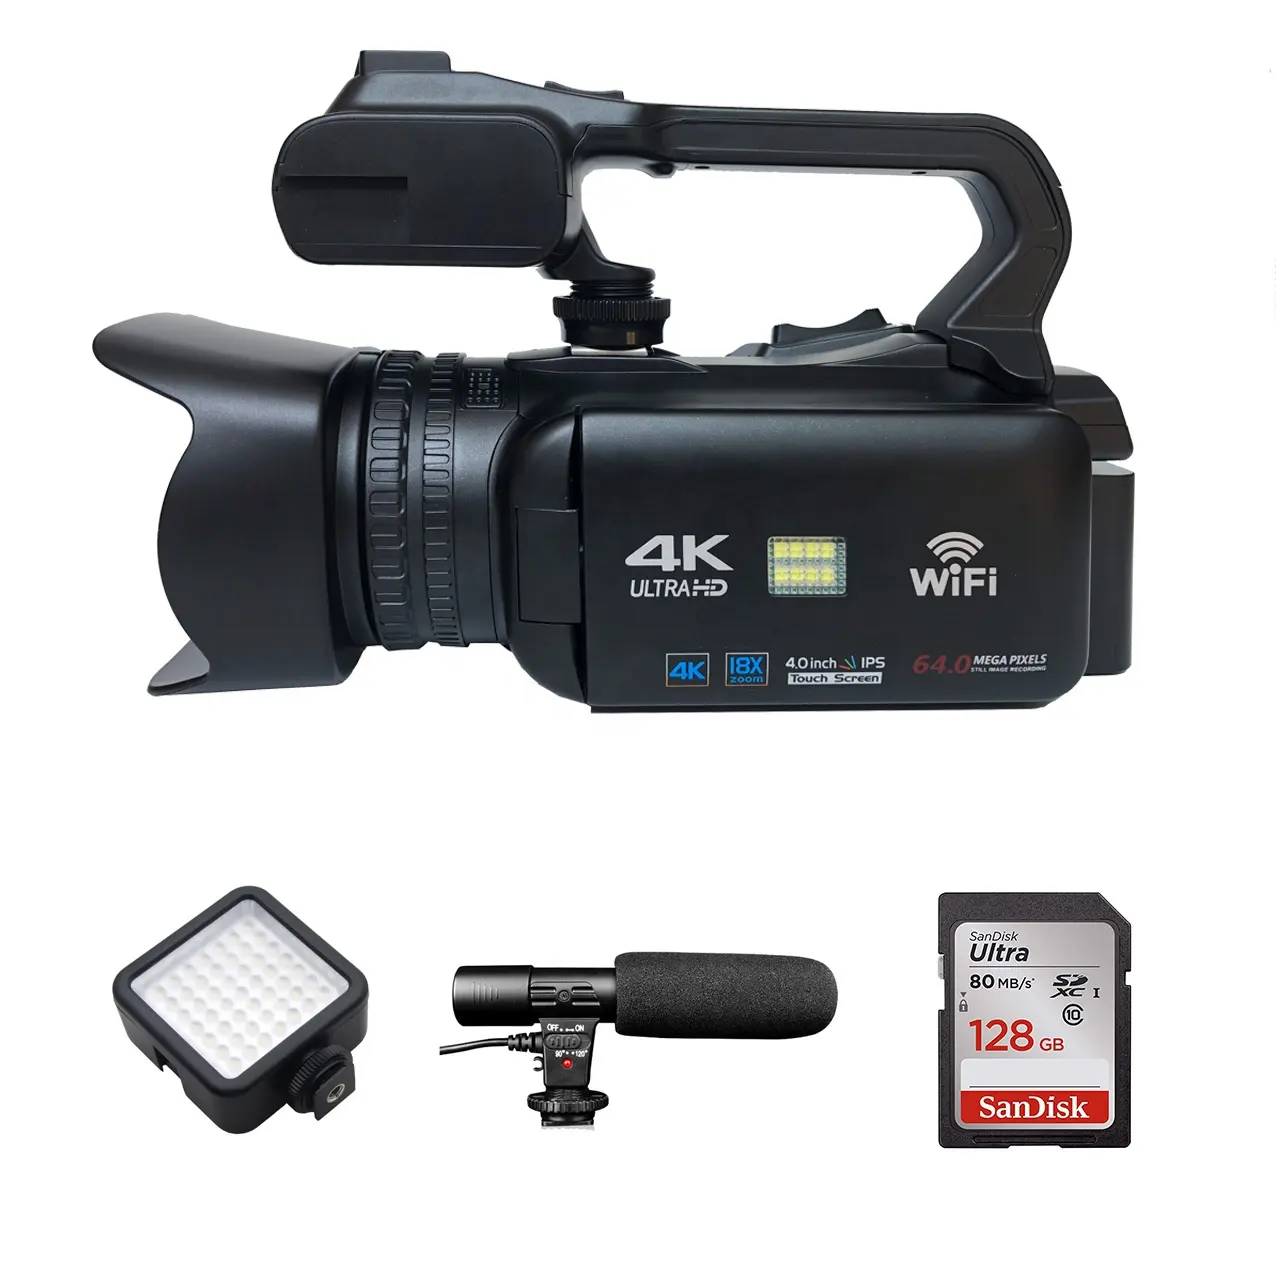 4K Camcorder Video Camera 64MP Wifi Webcam 4 Inch Touch Screen 18X Digitale Zoom Multifunctionele Camcorder